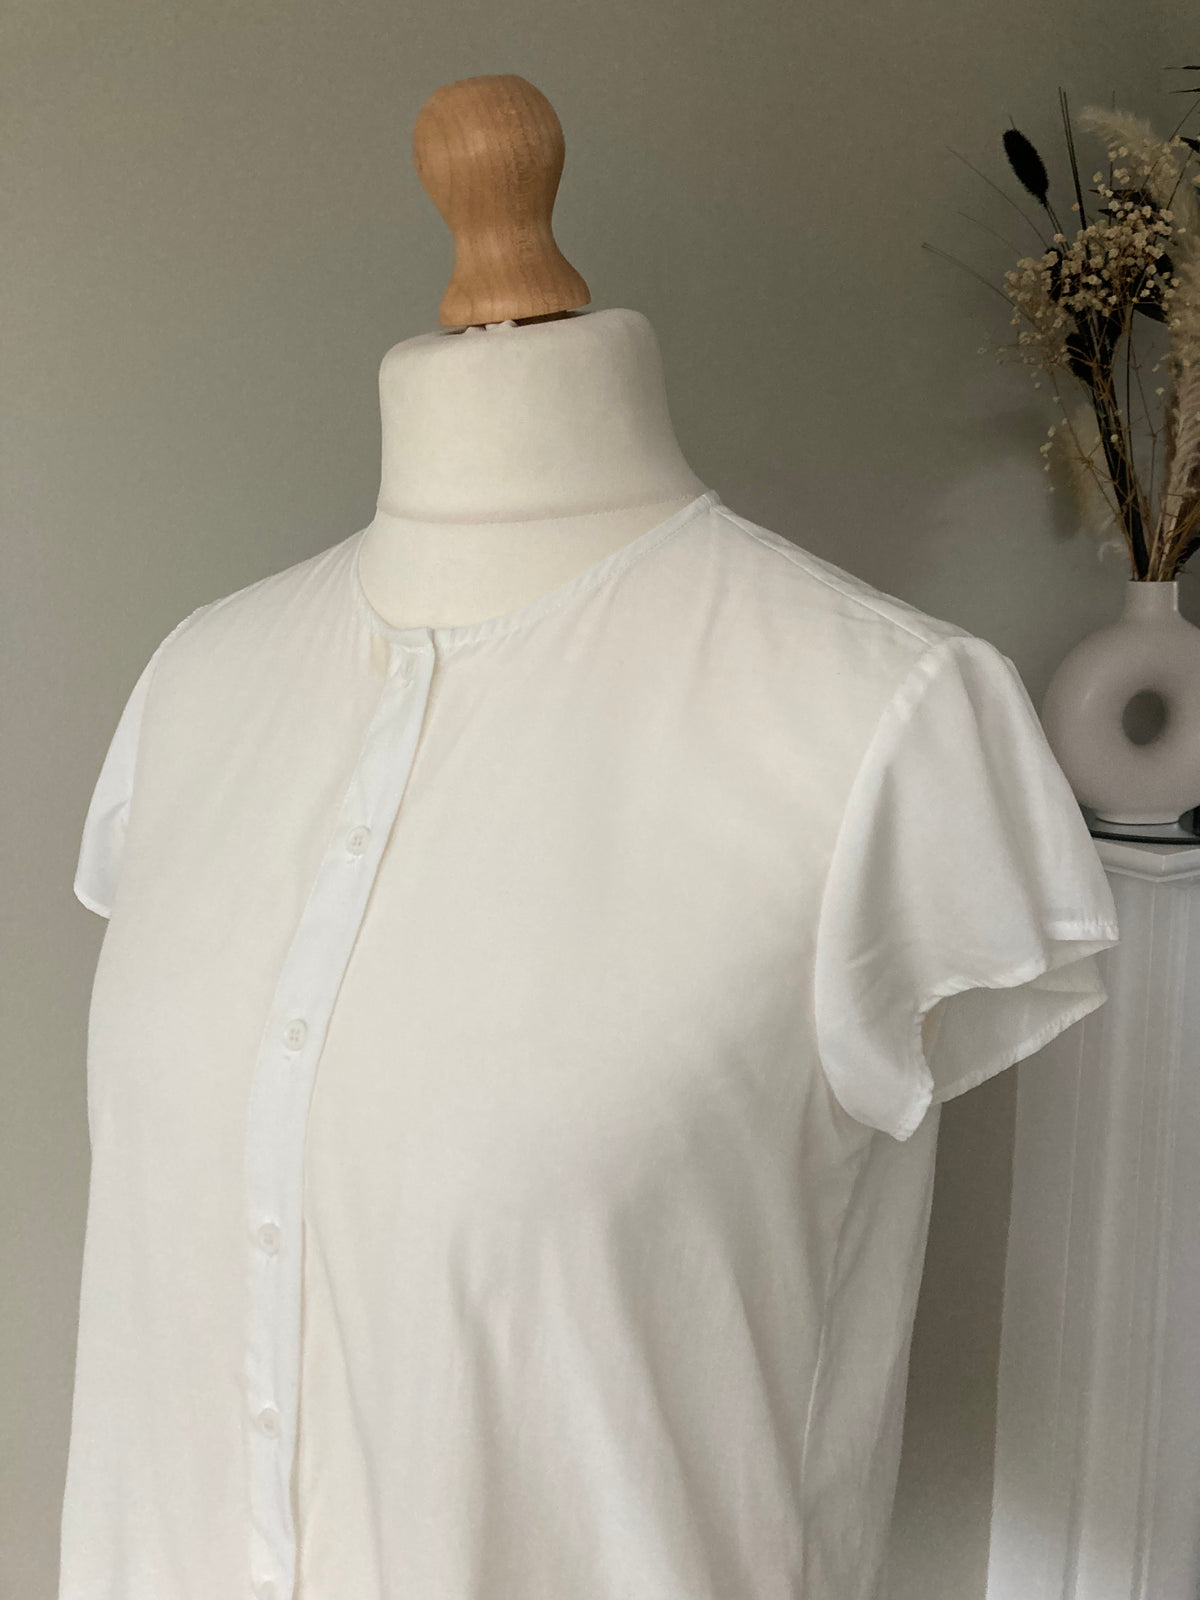 Ery Crepe Short Sleeve Shirt by FRENCH CONNECTION - Size M